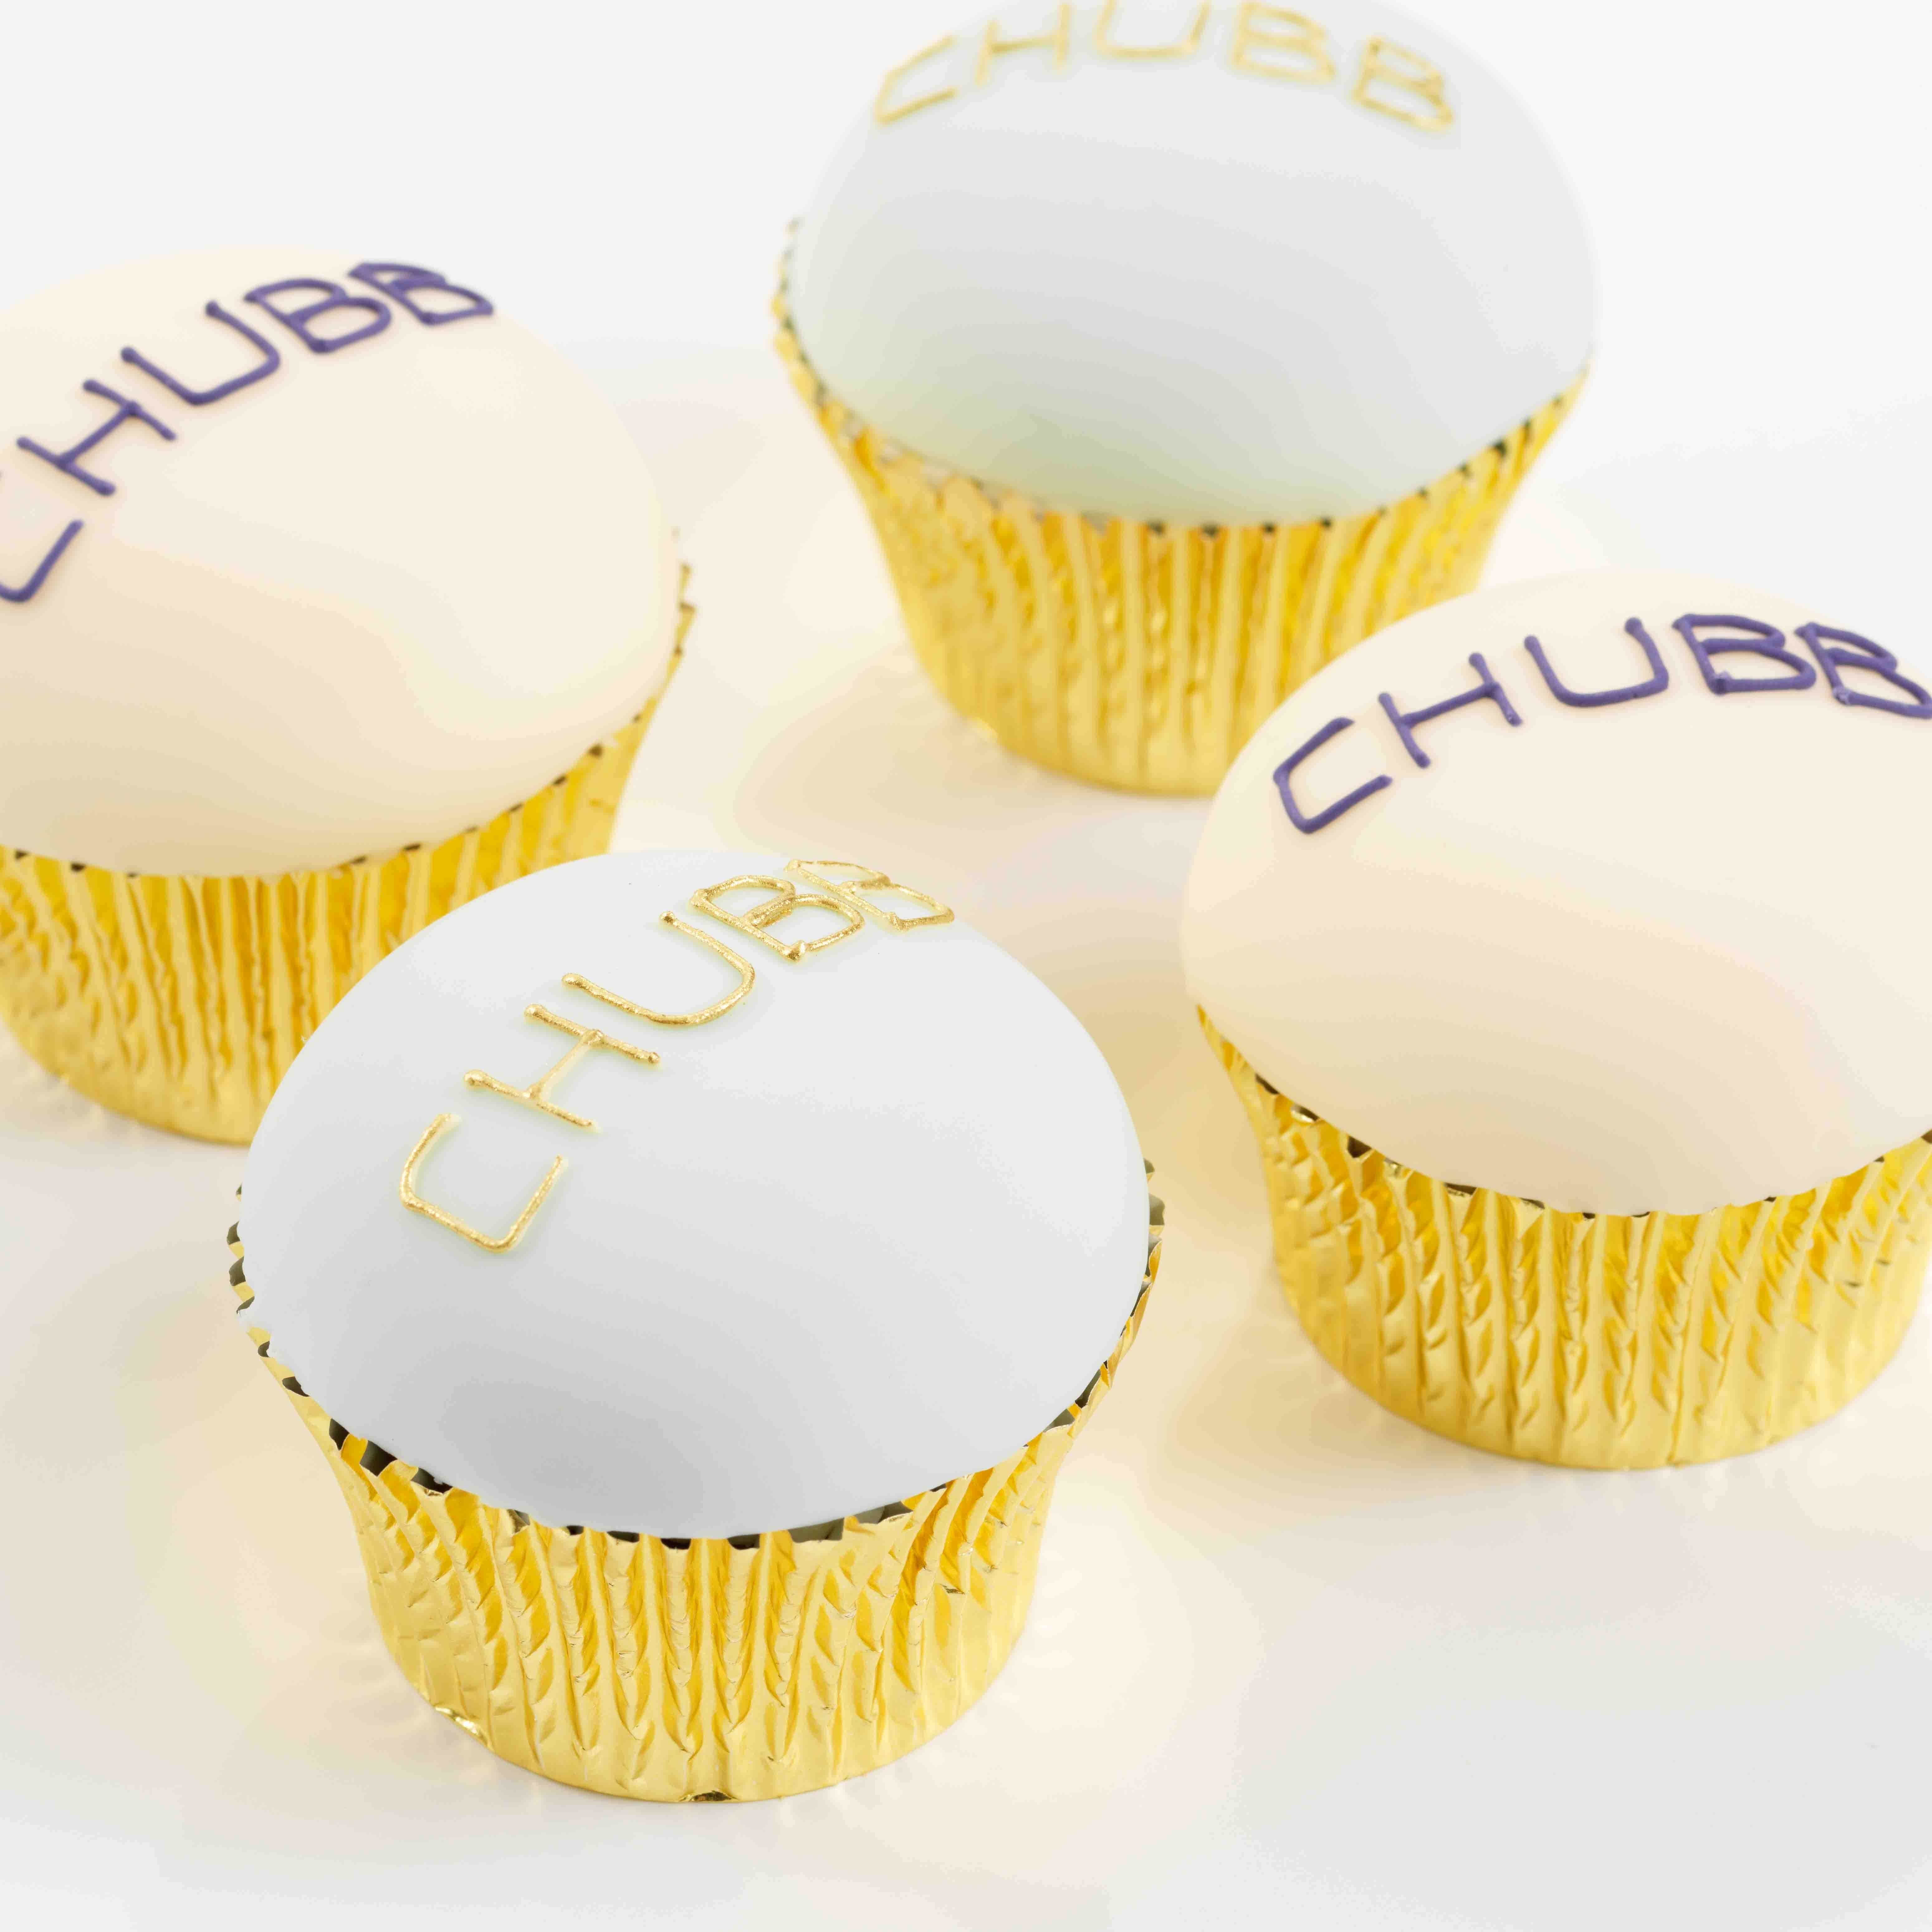 Corporate Piped Logo Fondant Company Cupcakes by Rosalind Miller Cakes London